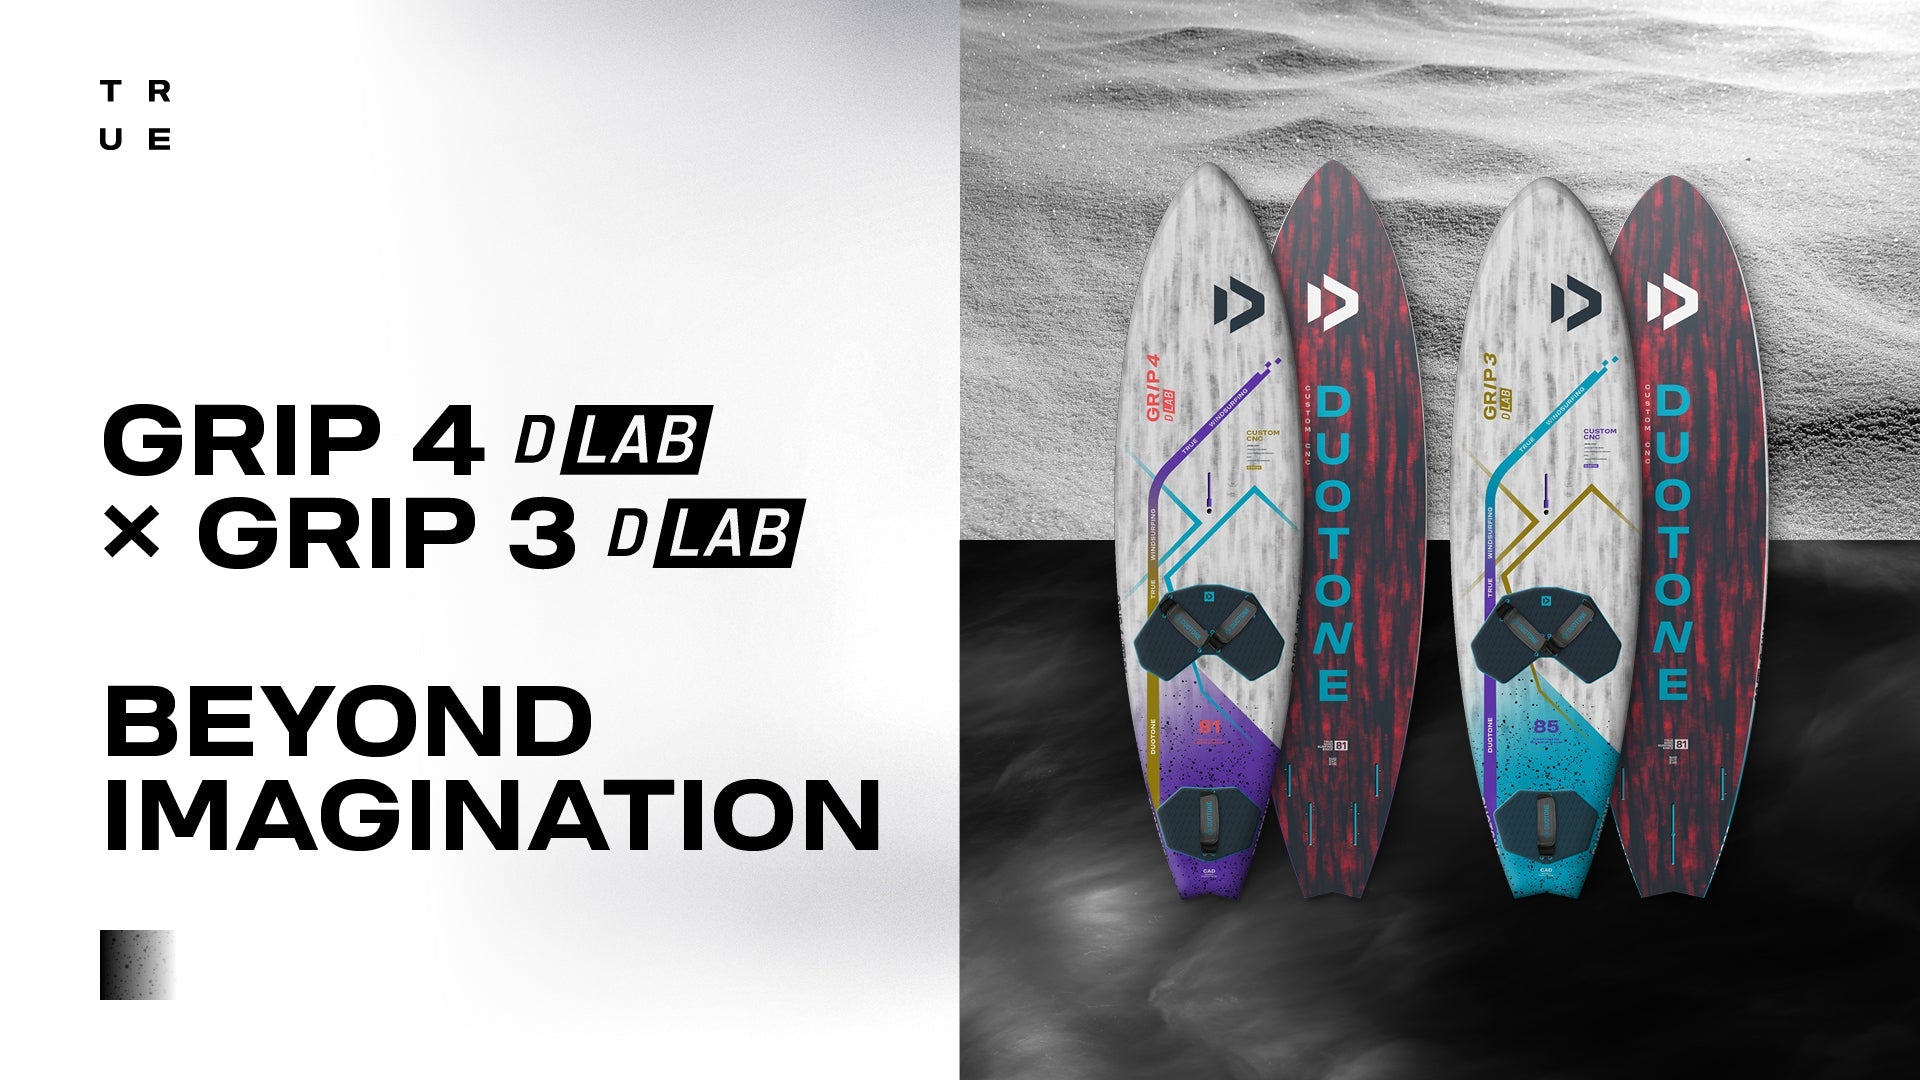 Duotone GRIP 3 & GRIP 4 in DLAB Construction out now! - Worthing Watersports